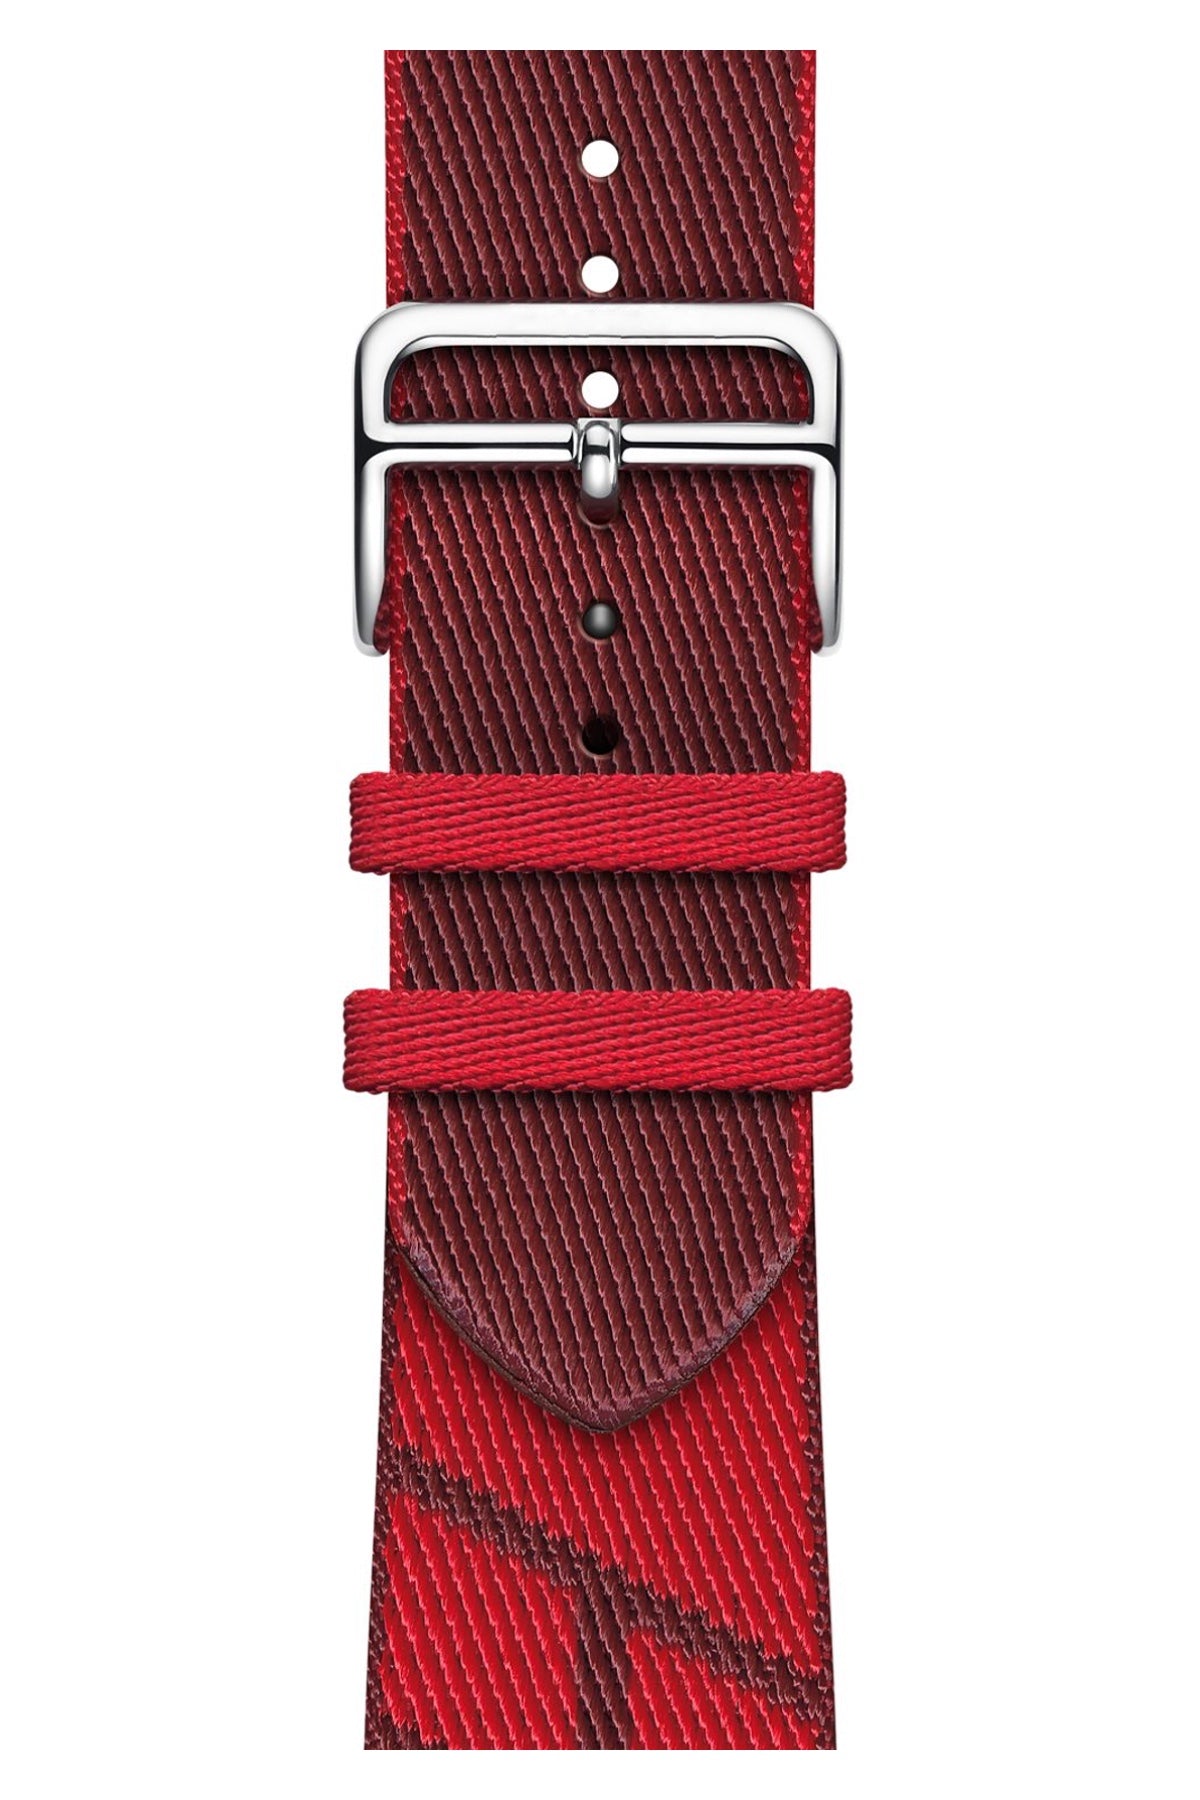 Apple Watch Compatible Simple Loop Knitted Band Crimson 